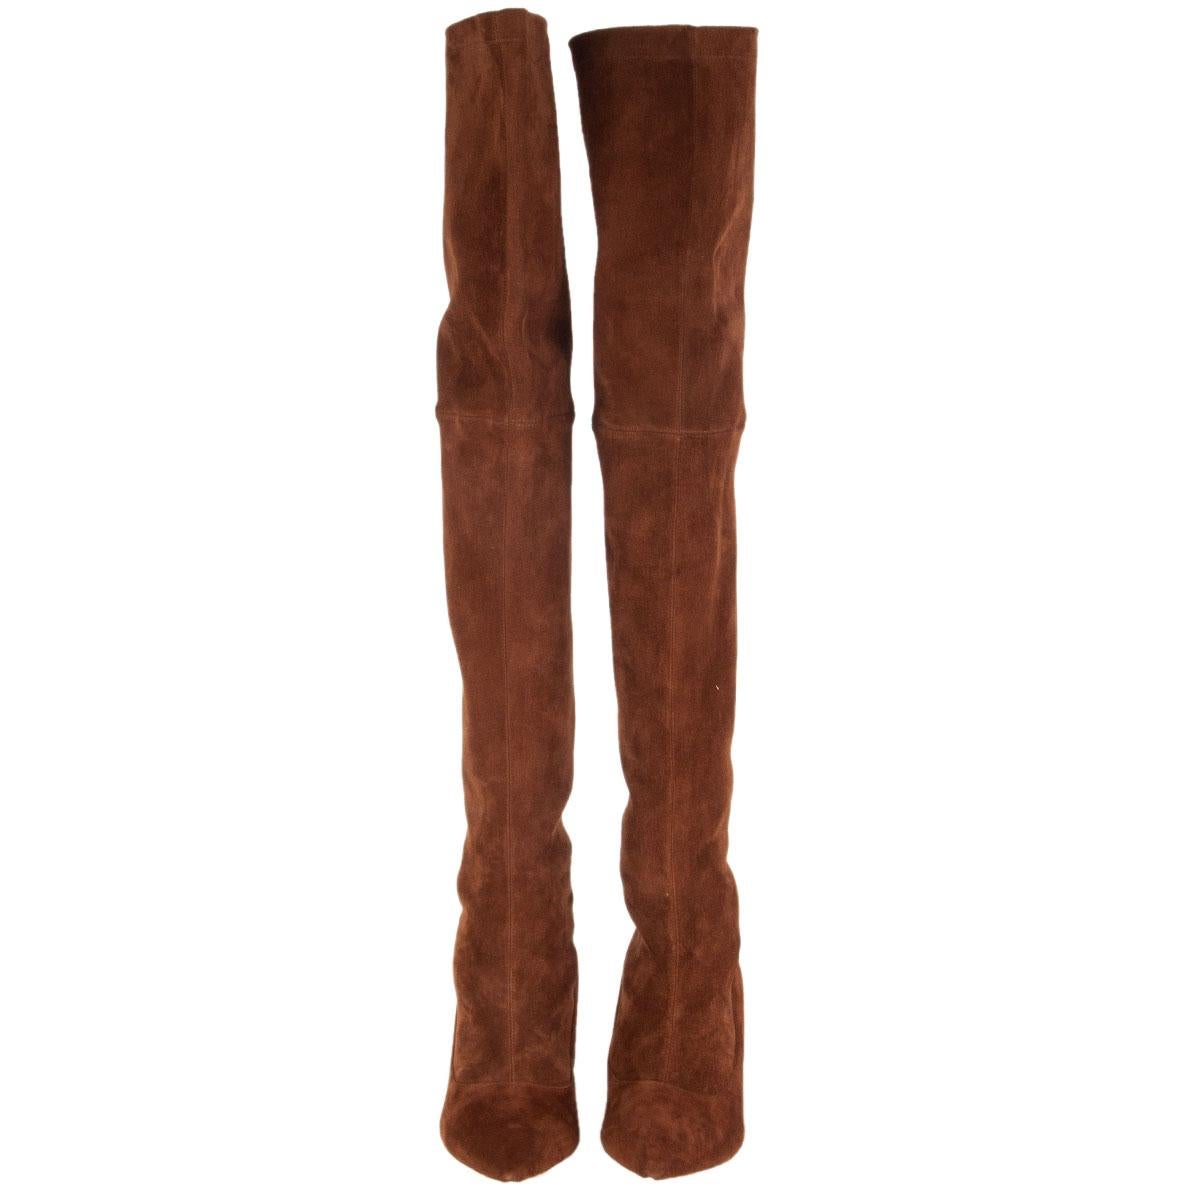 100% authentic Nicholas Kirkwood over the knee boots in brown stretchy suede with light gold-tone mirroed geometric heel. Brand new. 

Measurements
Imprinted Size	42
Shoe Size	42
Inside Sole	27.5cm (10.7in)
Width	7.5cm (2.9in)
Heel	5cm